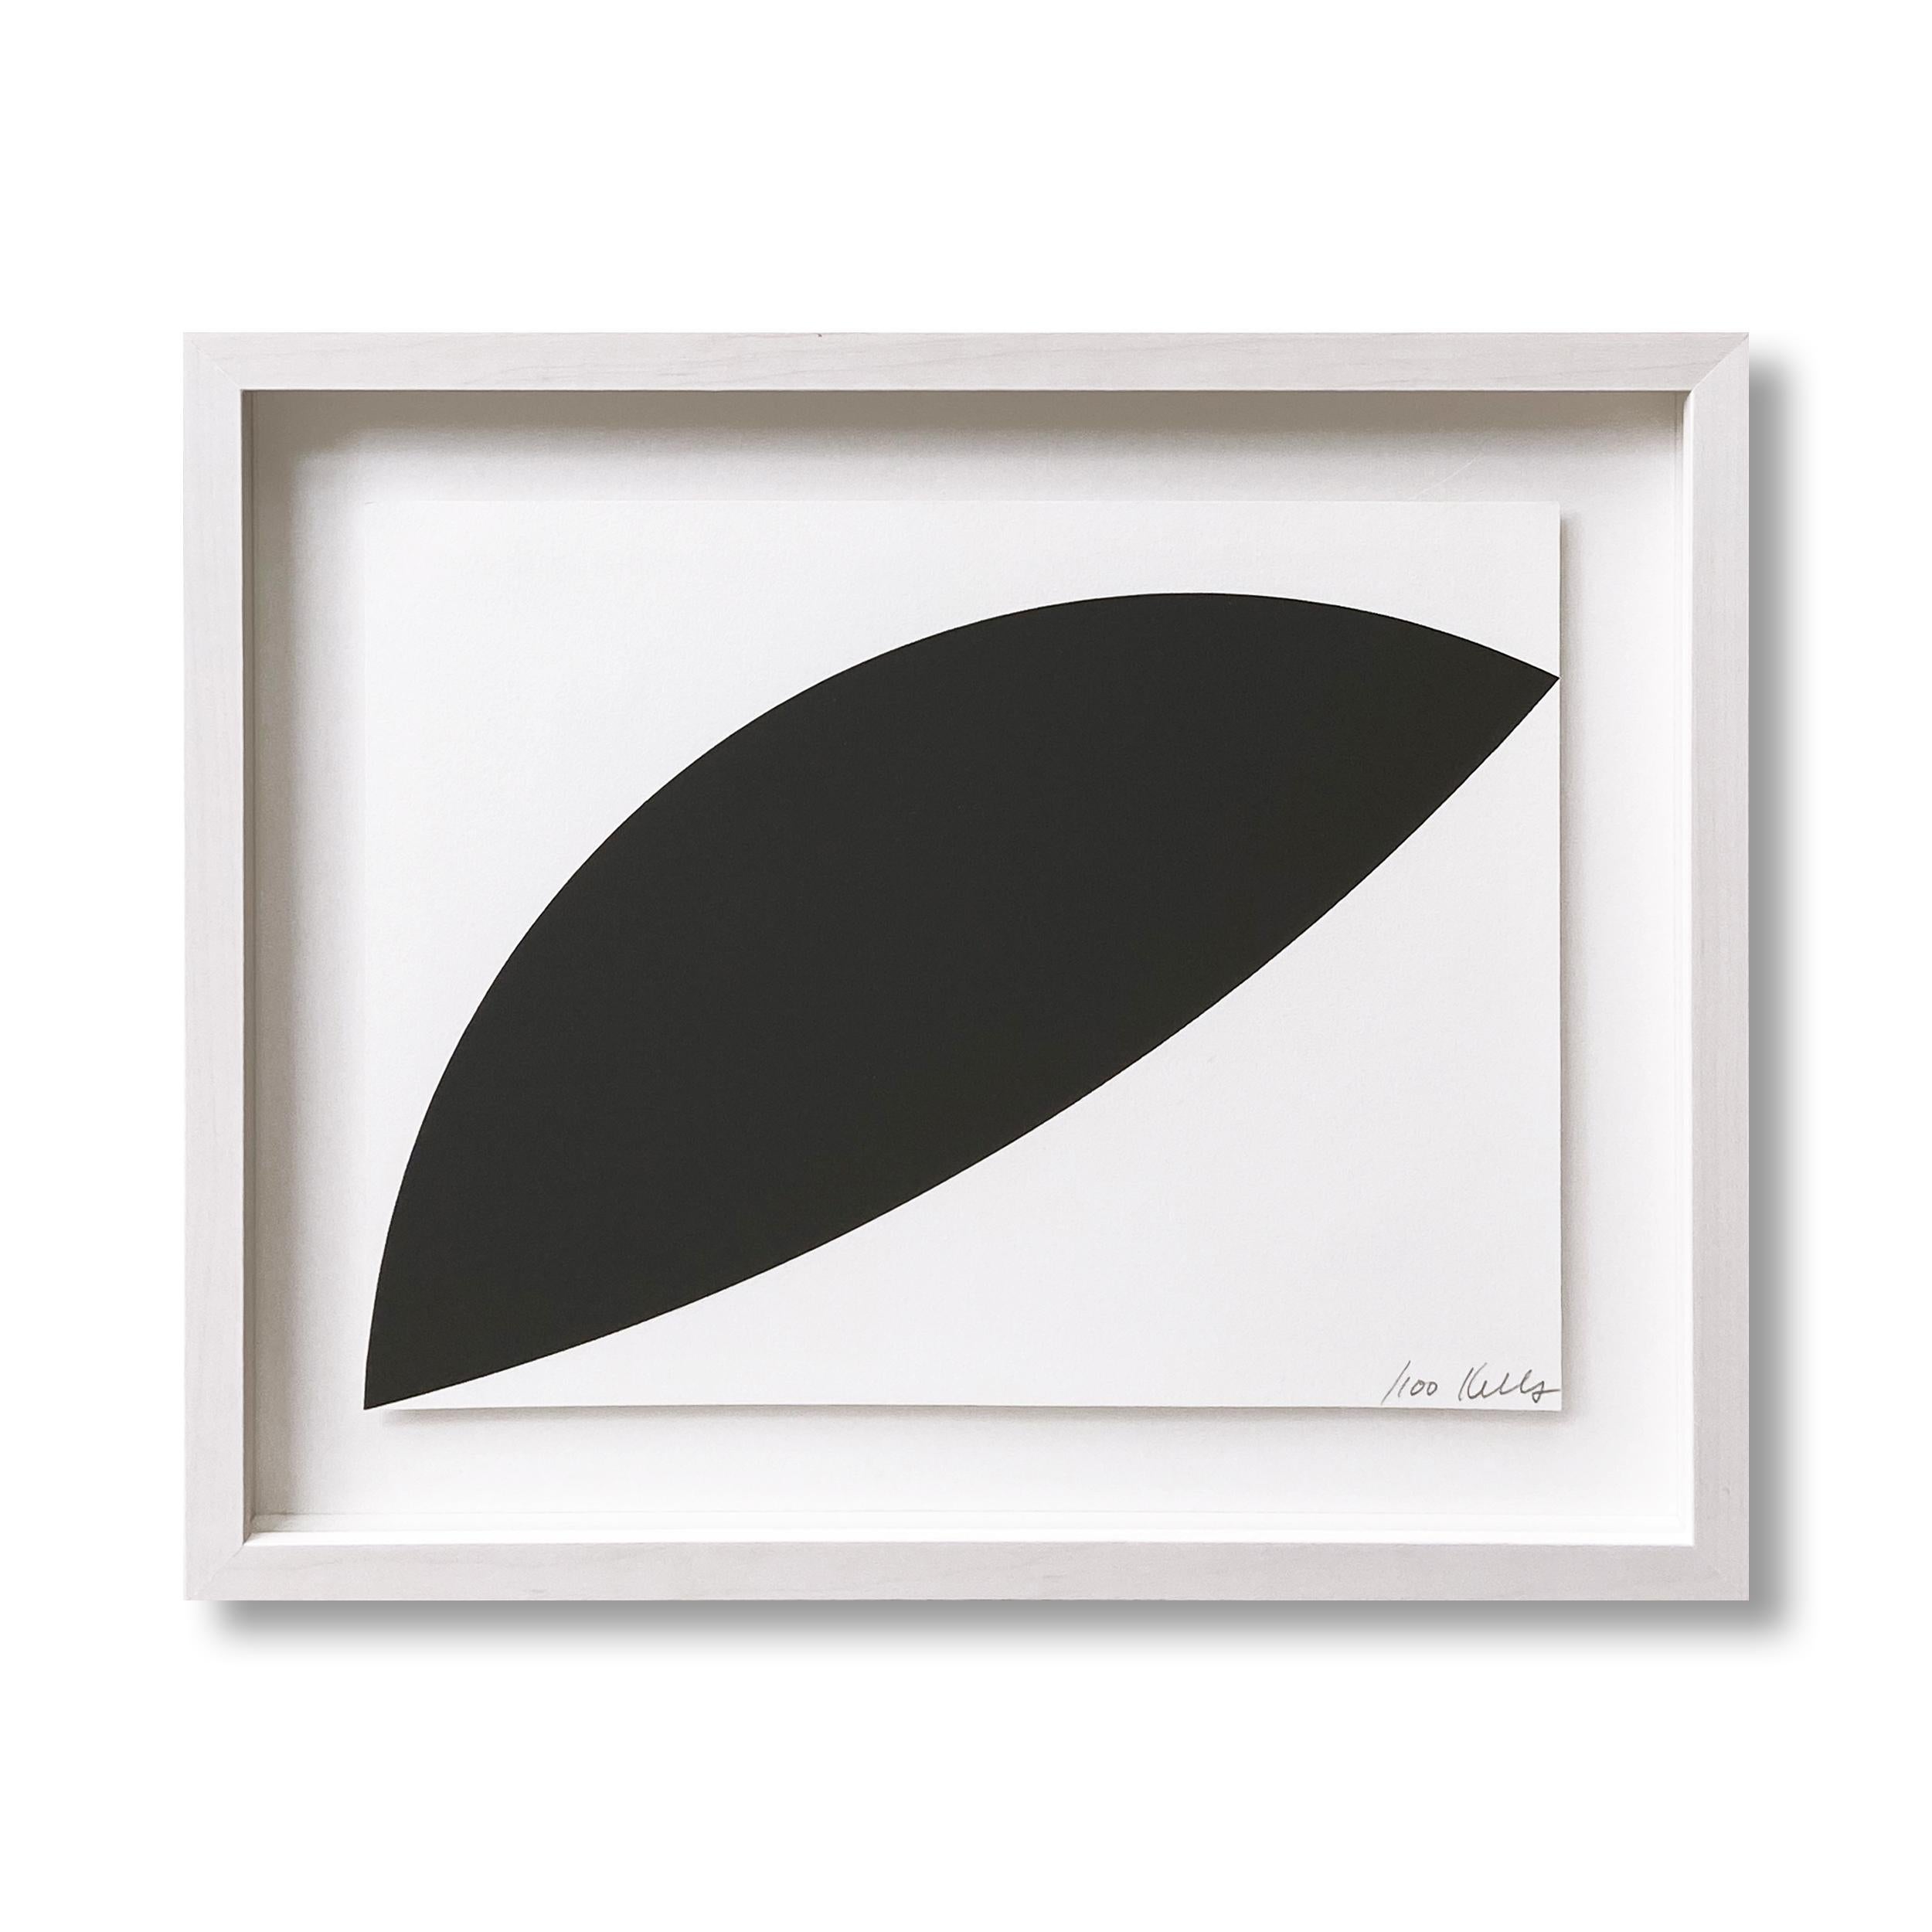 Ellsworth Kelly Abstract Print - Two Curves, Abstract Art, Geometric Abstraction, Hard-Edge, Minimalism